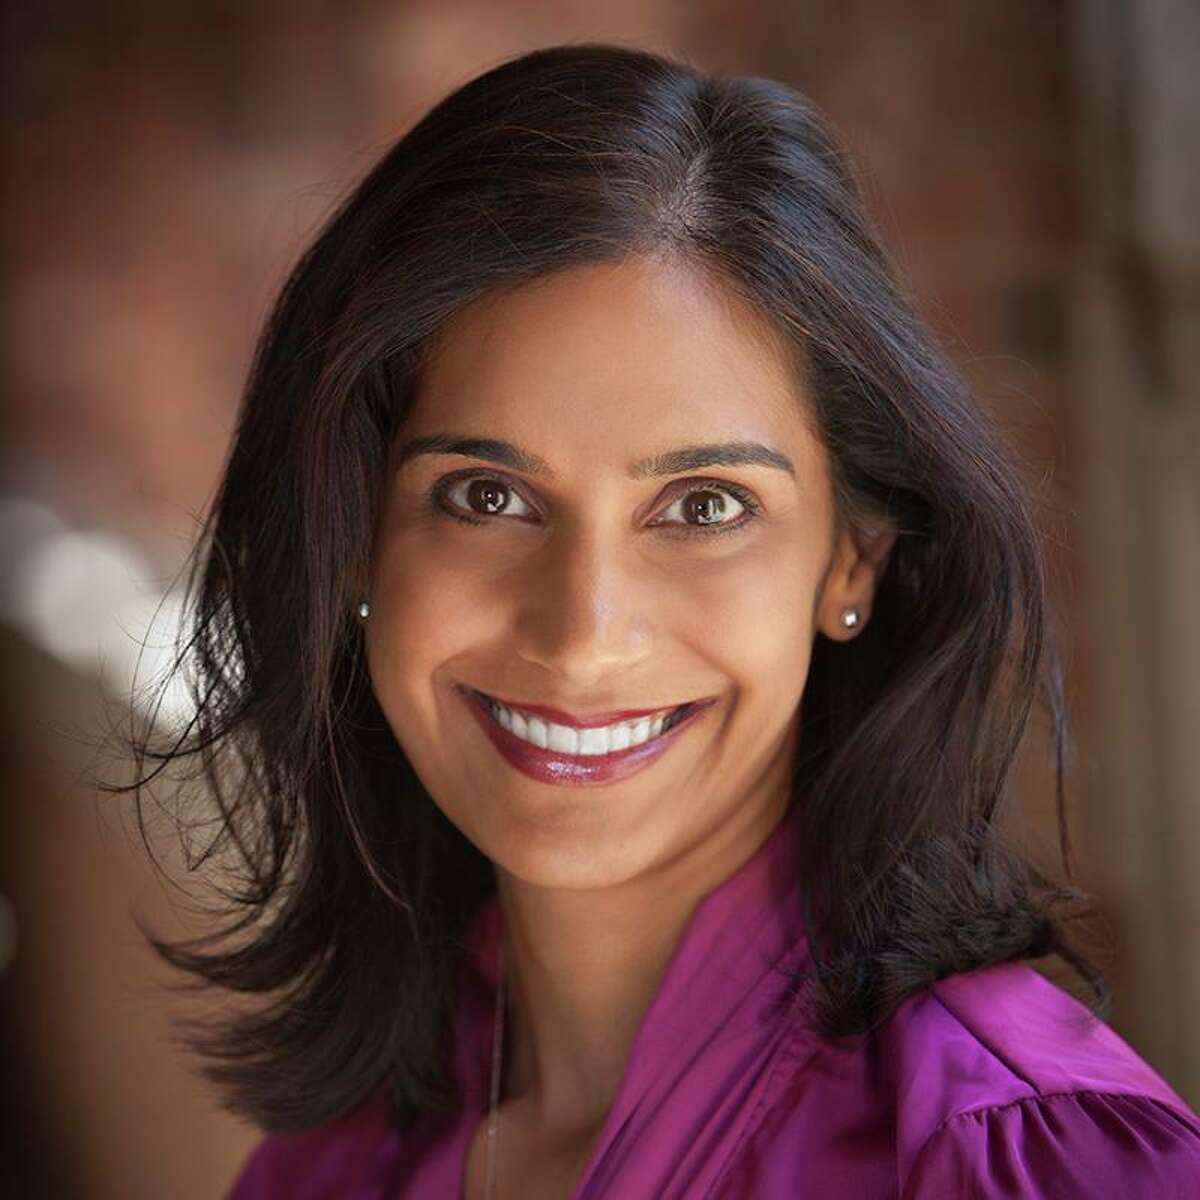 Asha Rangappa, a senior lecturer at Yale University’s Jackson Institute for Global Affairs, will speak on “Information Warfare and Social Media: Preserving Democracy in the (Dis)Information Age” on Wednesday at the Greenwich Retired Men’s Association. The free program begins at 10:40 a.m. with a social period, followed by the speaker at 11 a.m. At the First Presbyterian Church, 1 W. Putnam Ave.